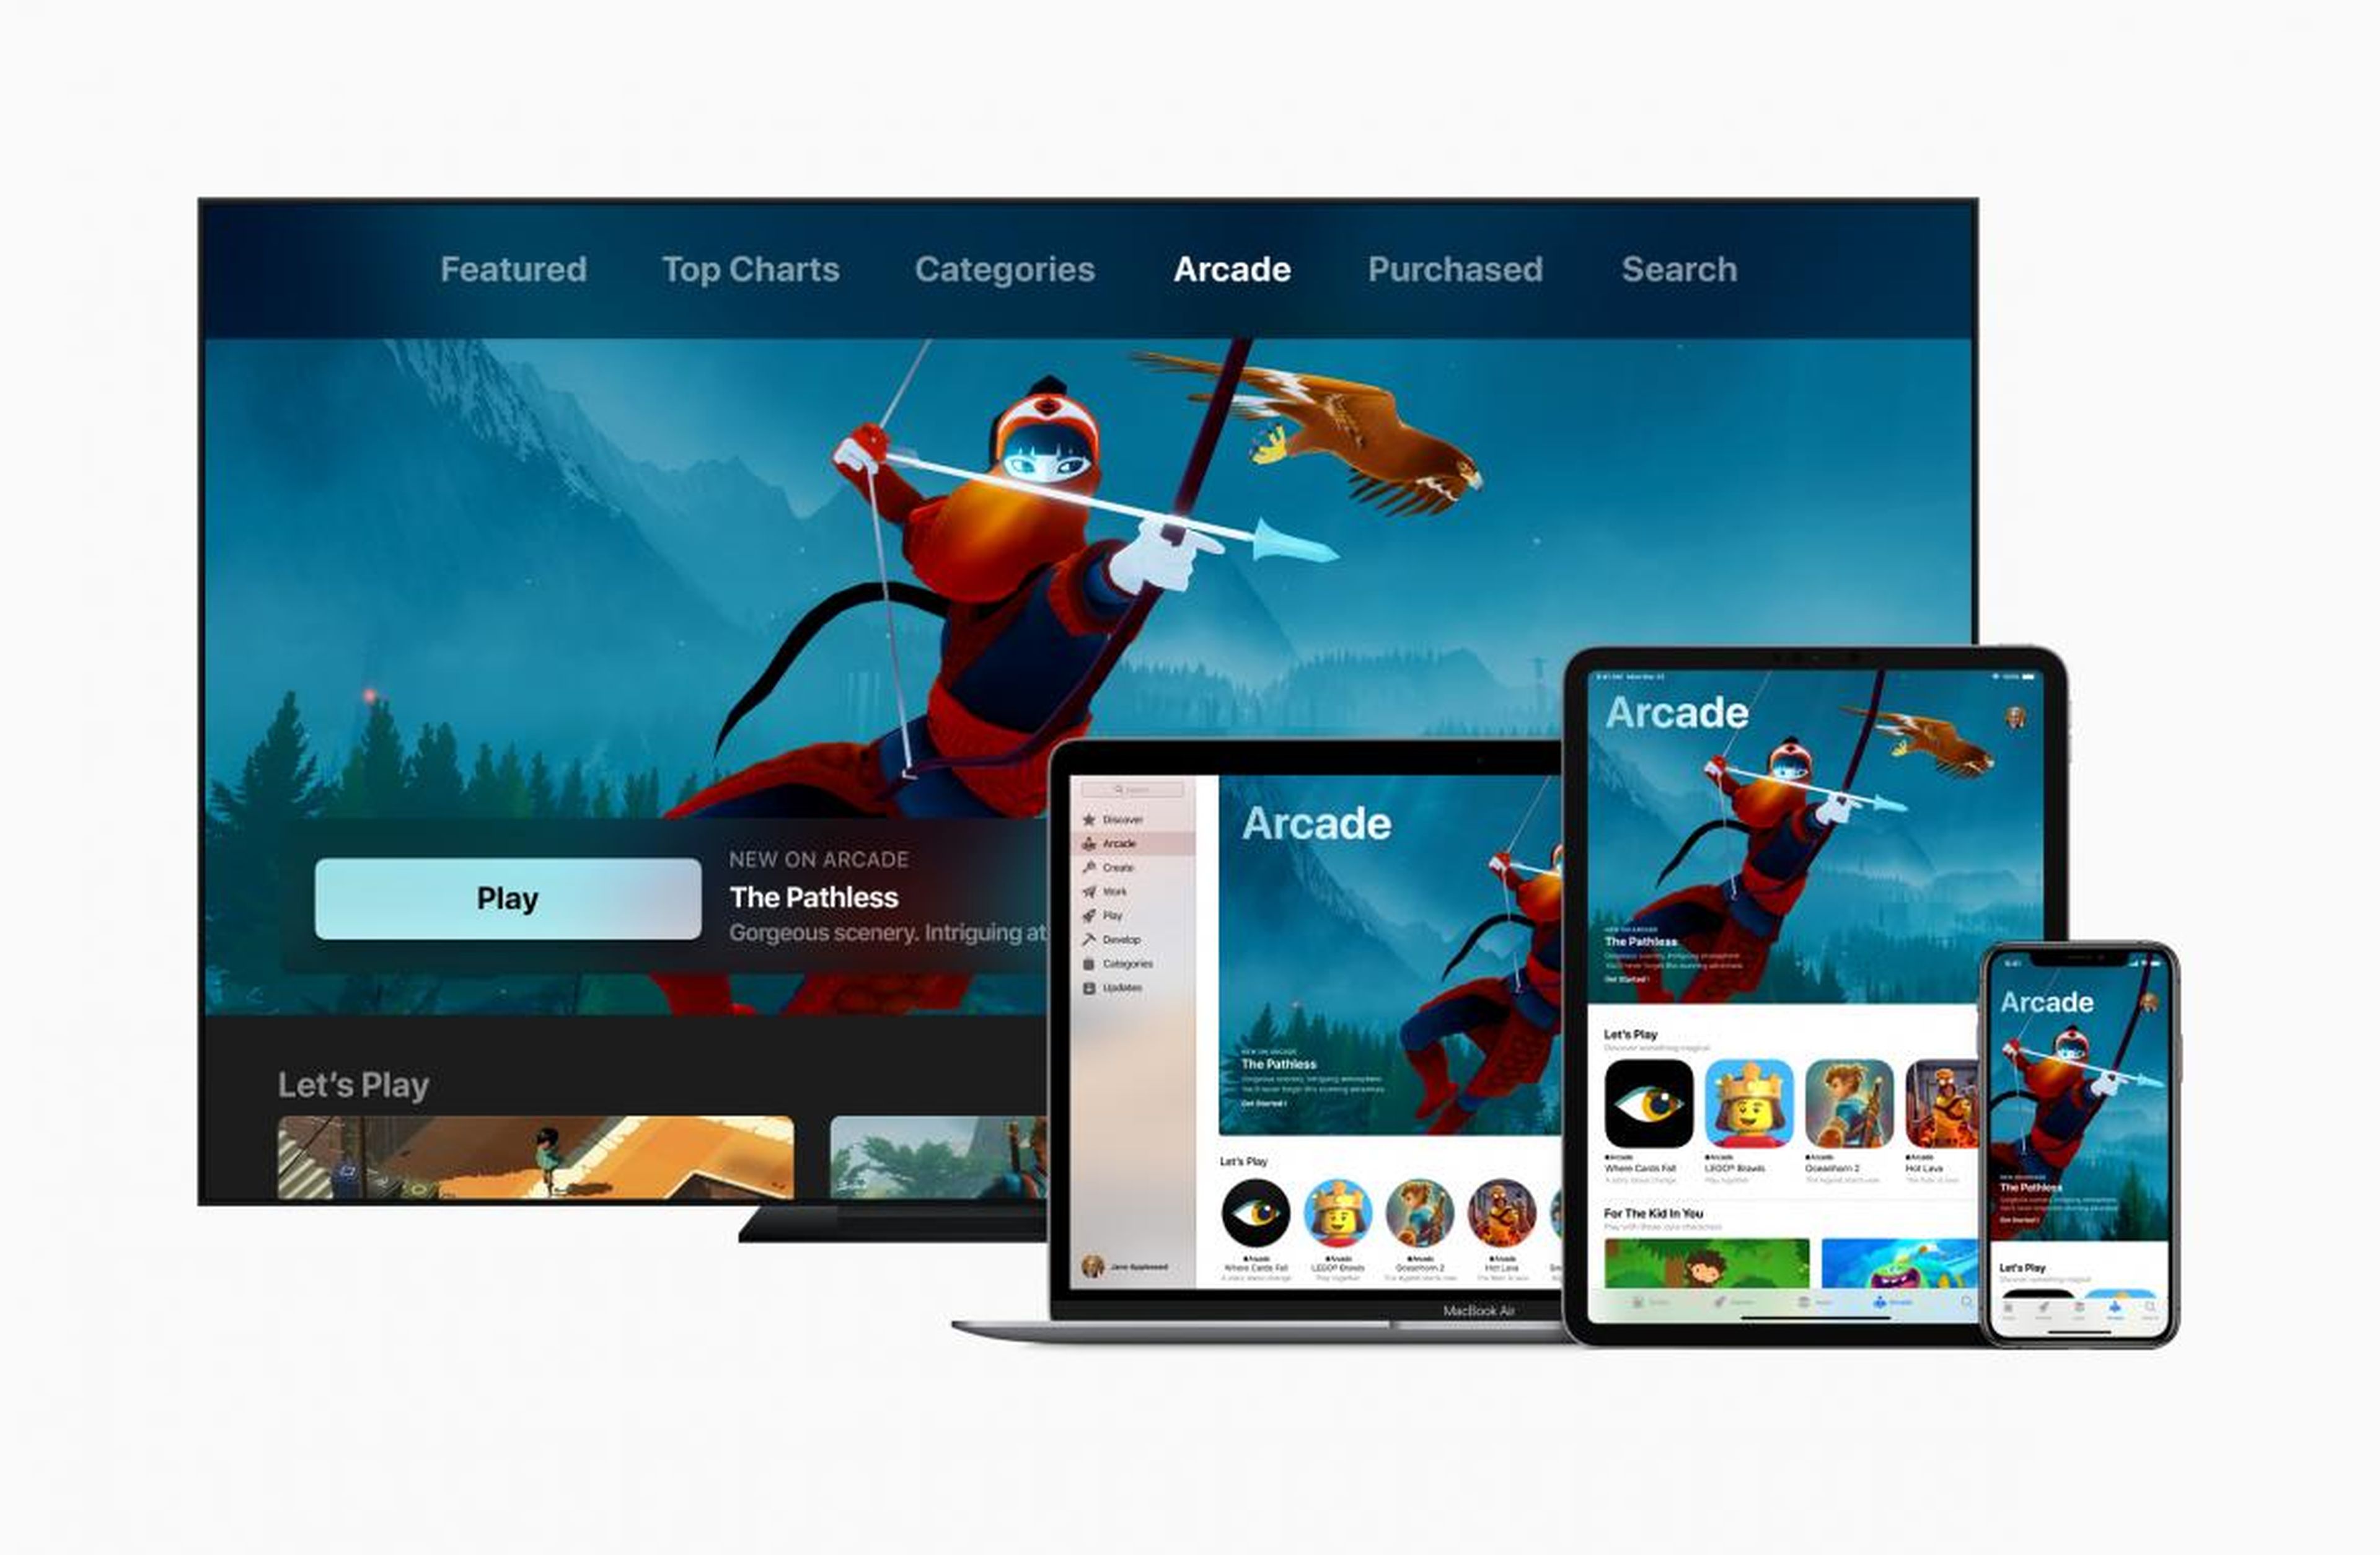 The good news is, Apple is already pursuing this strategy with its new game-streaming service coming later this year, called Apple Arcade. Apple has confirmed that Arcade will only cost $5 a month.